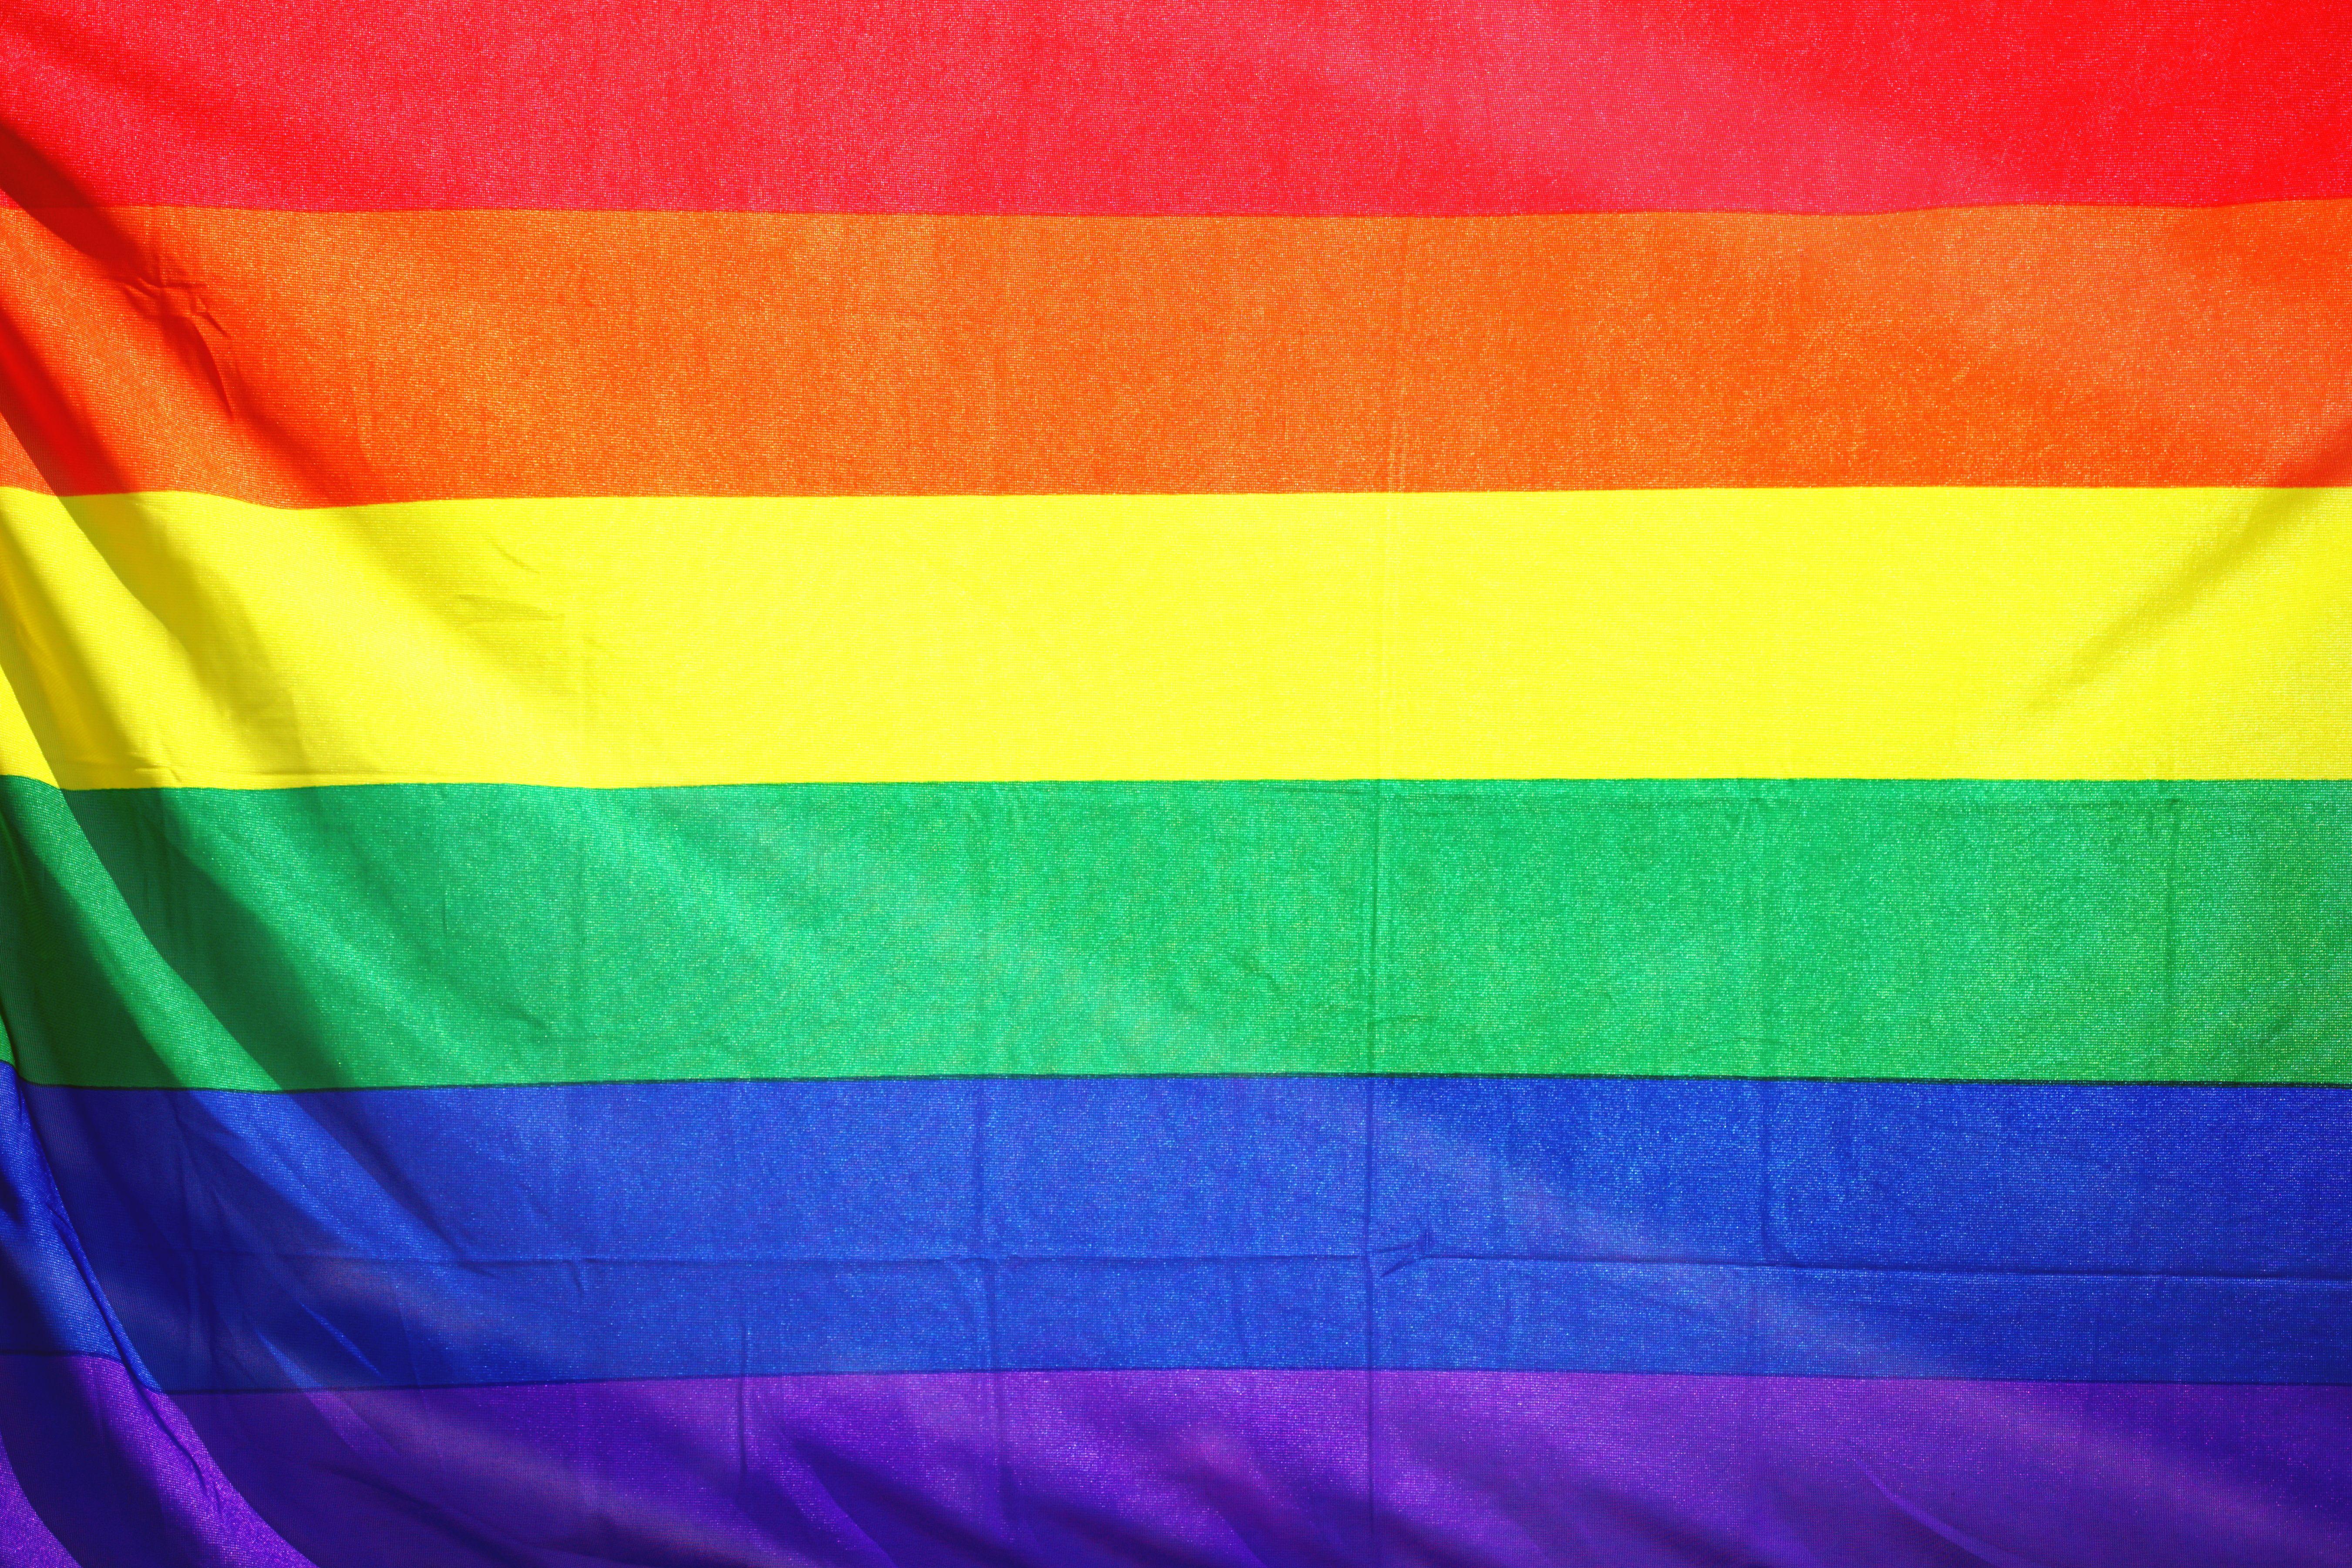 gay pride colors background